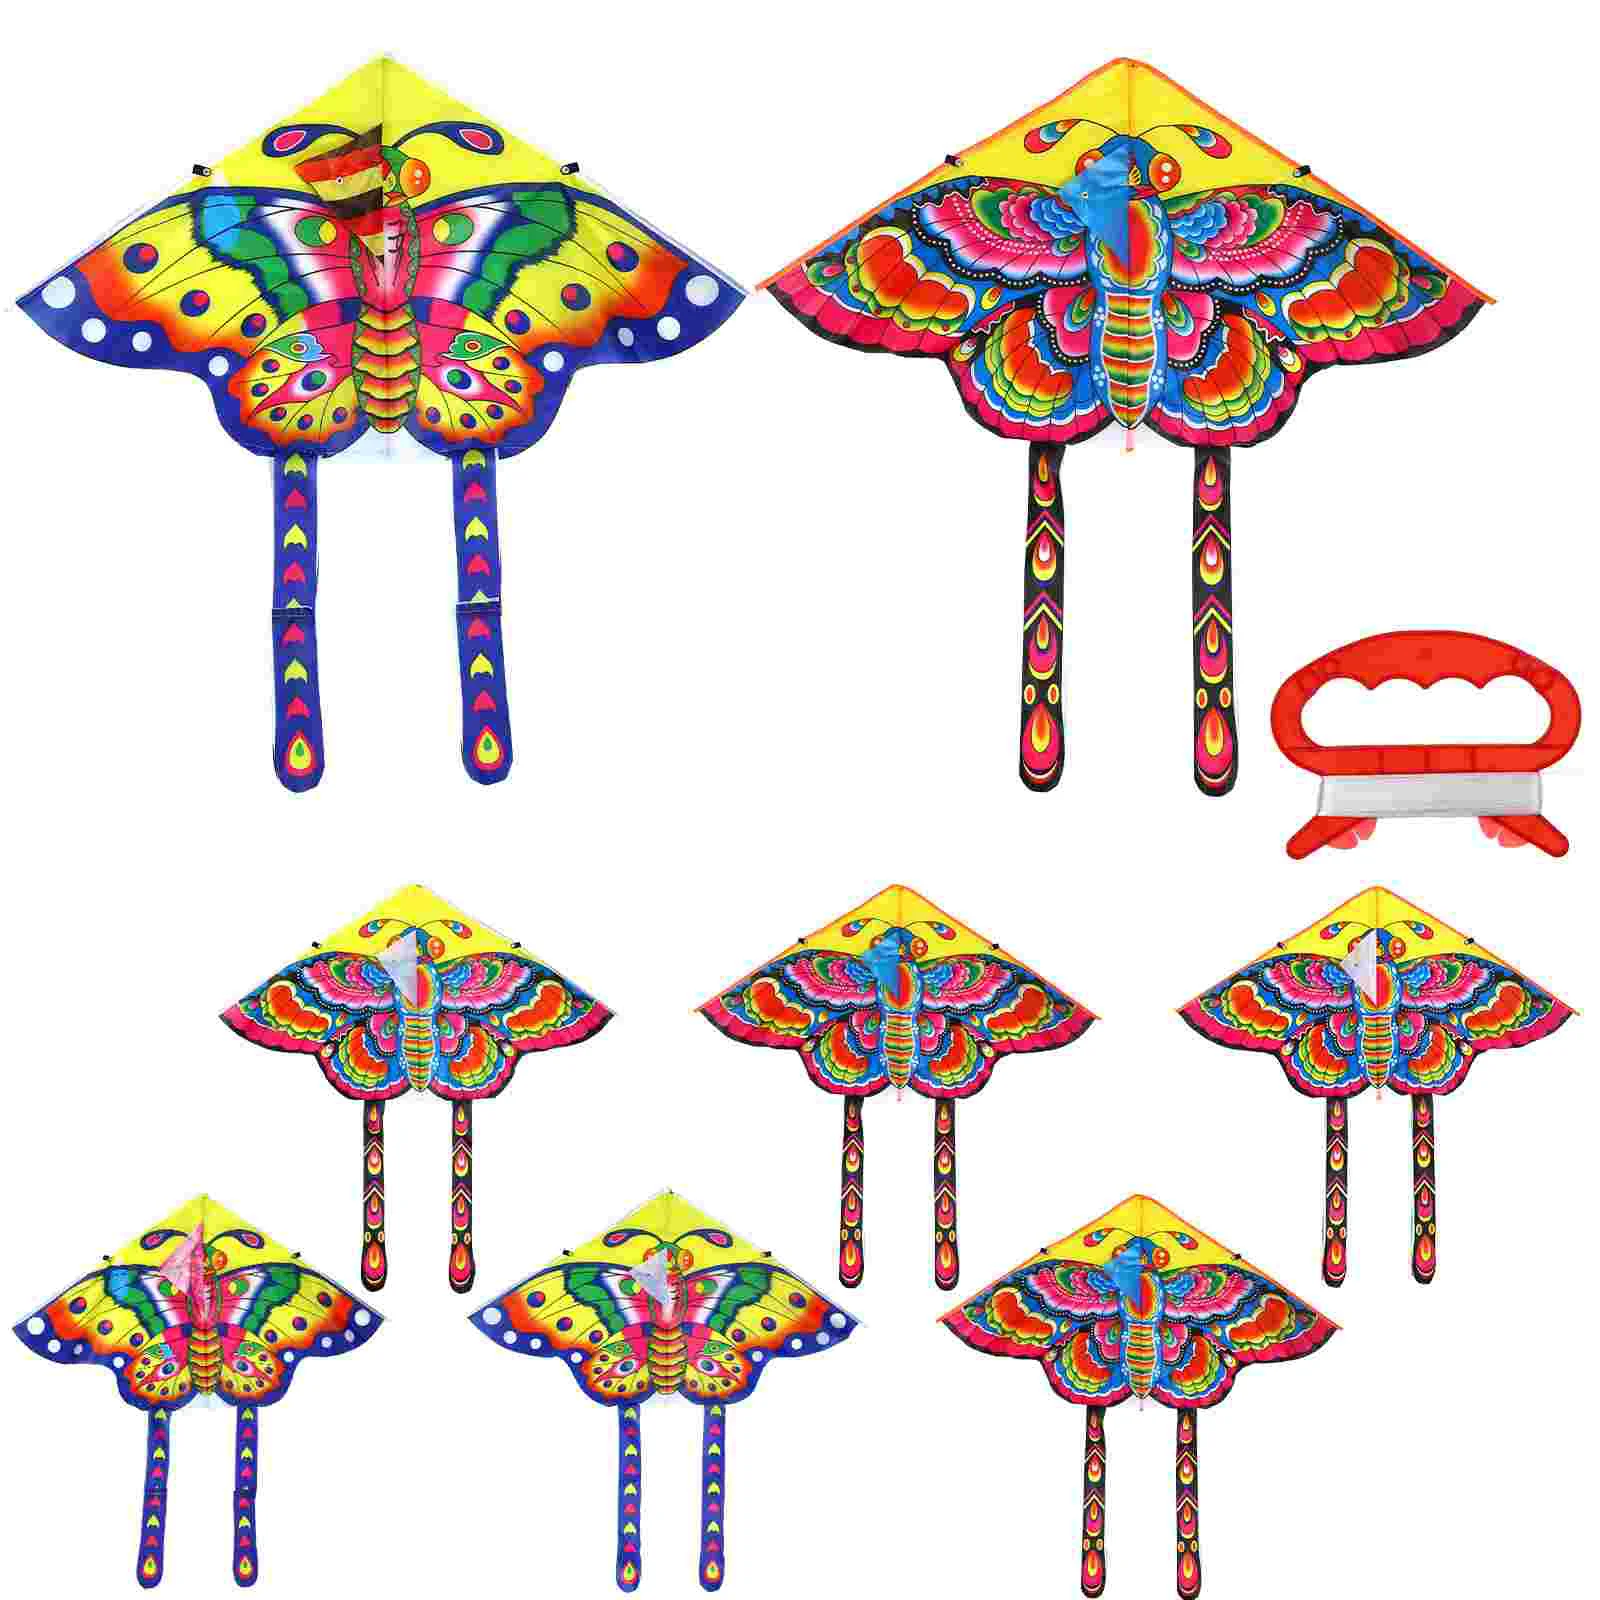 

Kite Easy to Fly Butterflies for Kids Cloth Triangle Outdoor Creative Kites Toy Colorful See